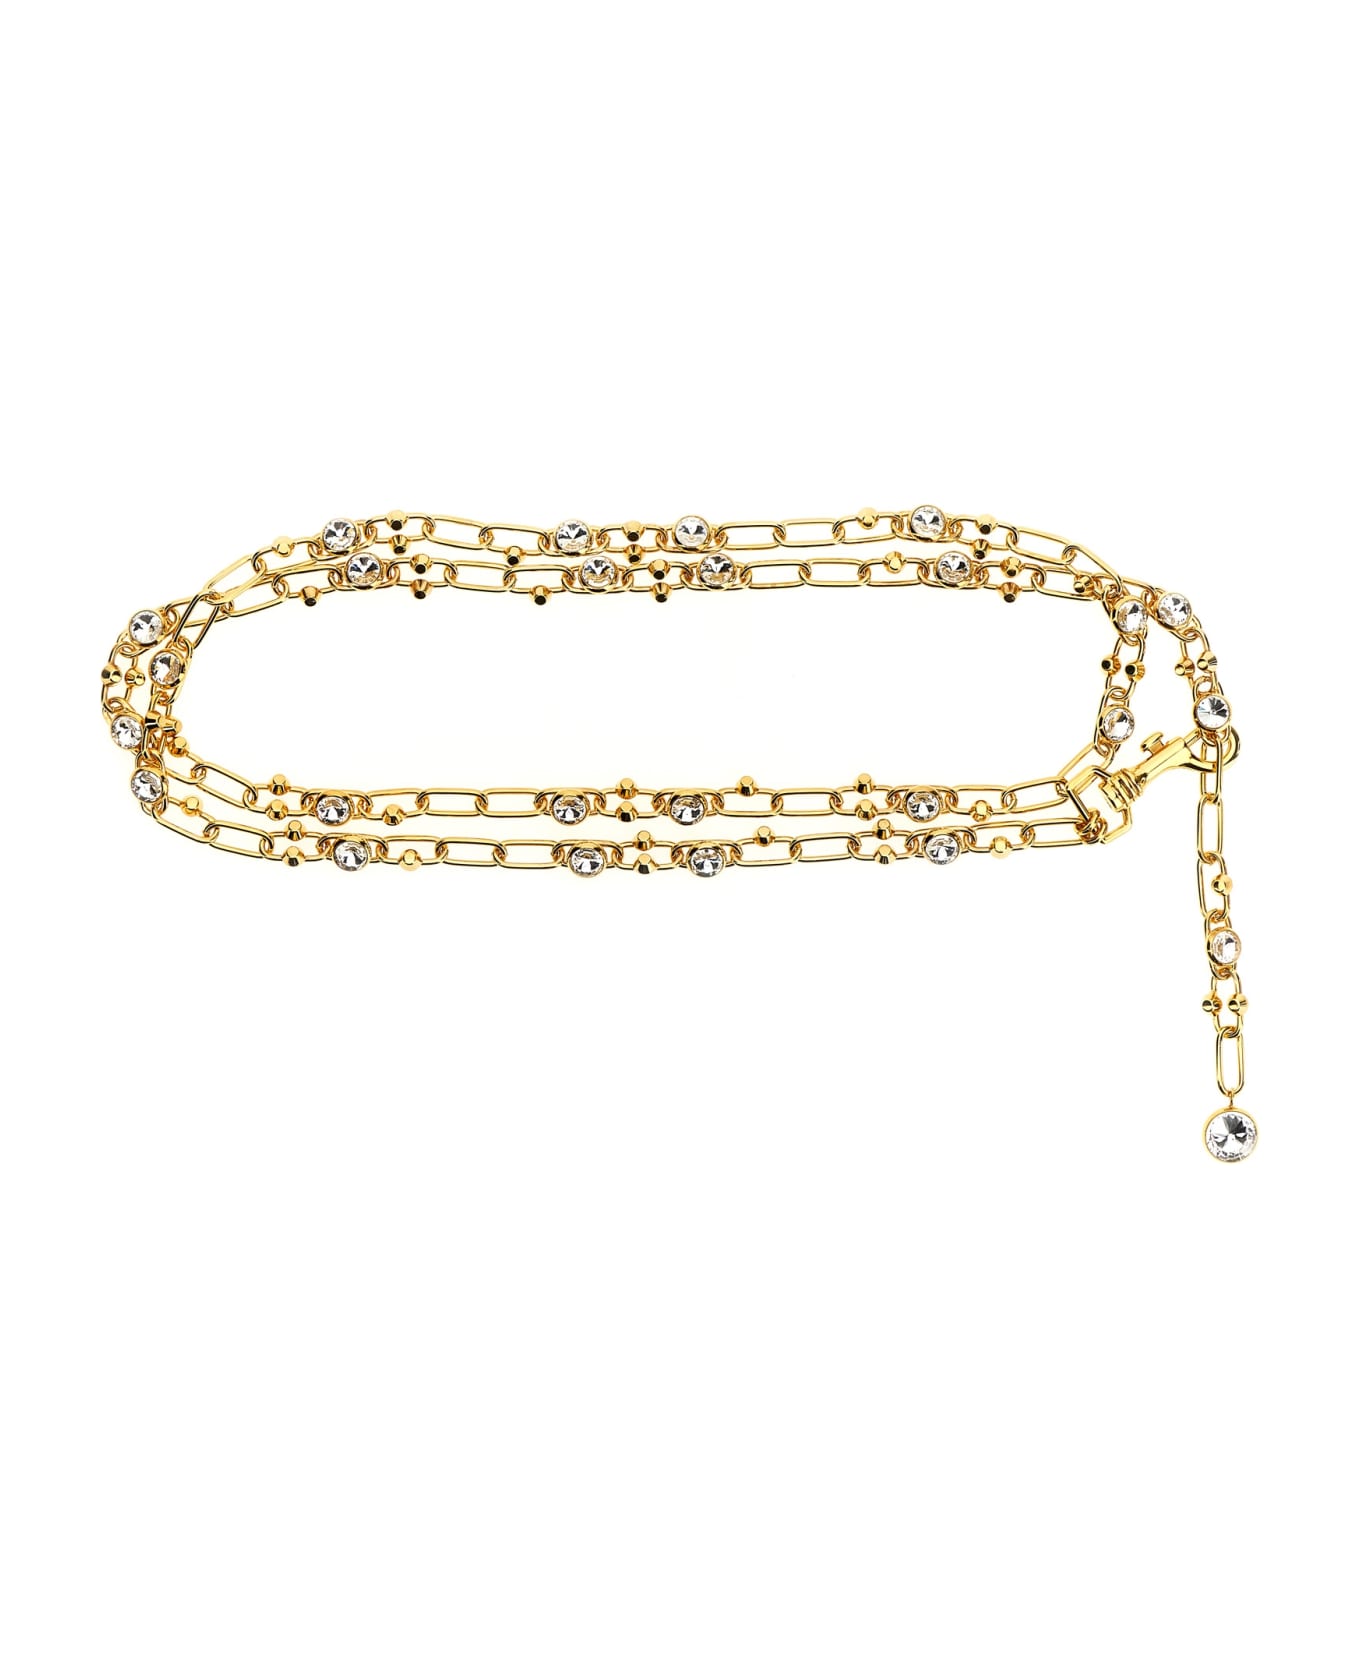 Alessandra Rich Chain And Crystal Belt - Gold ベルト